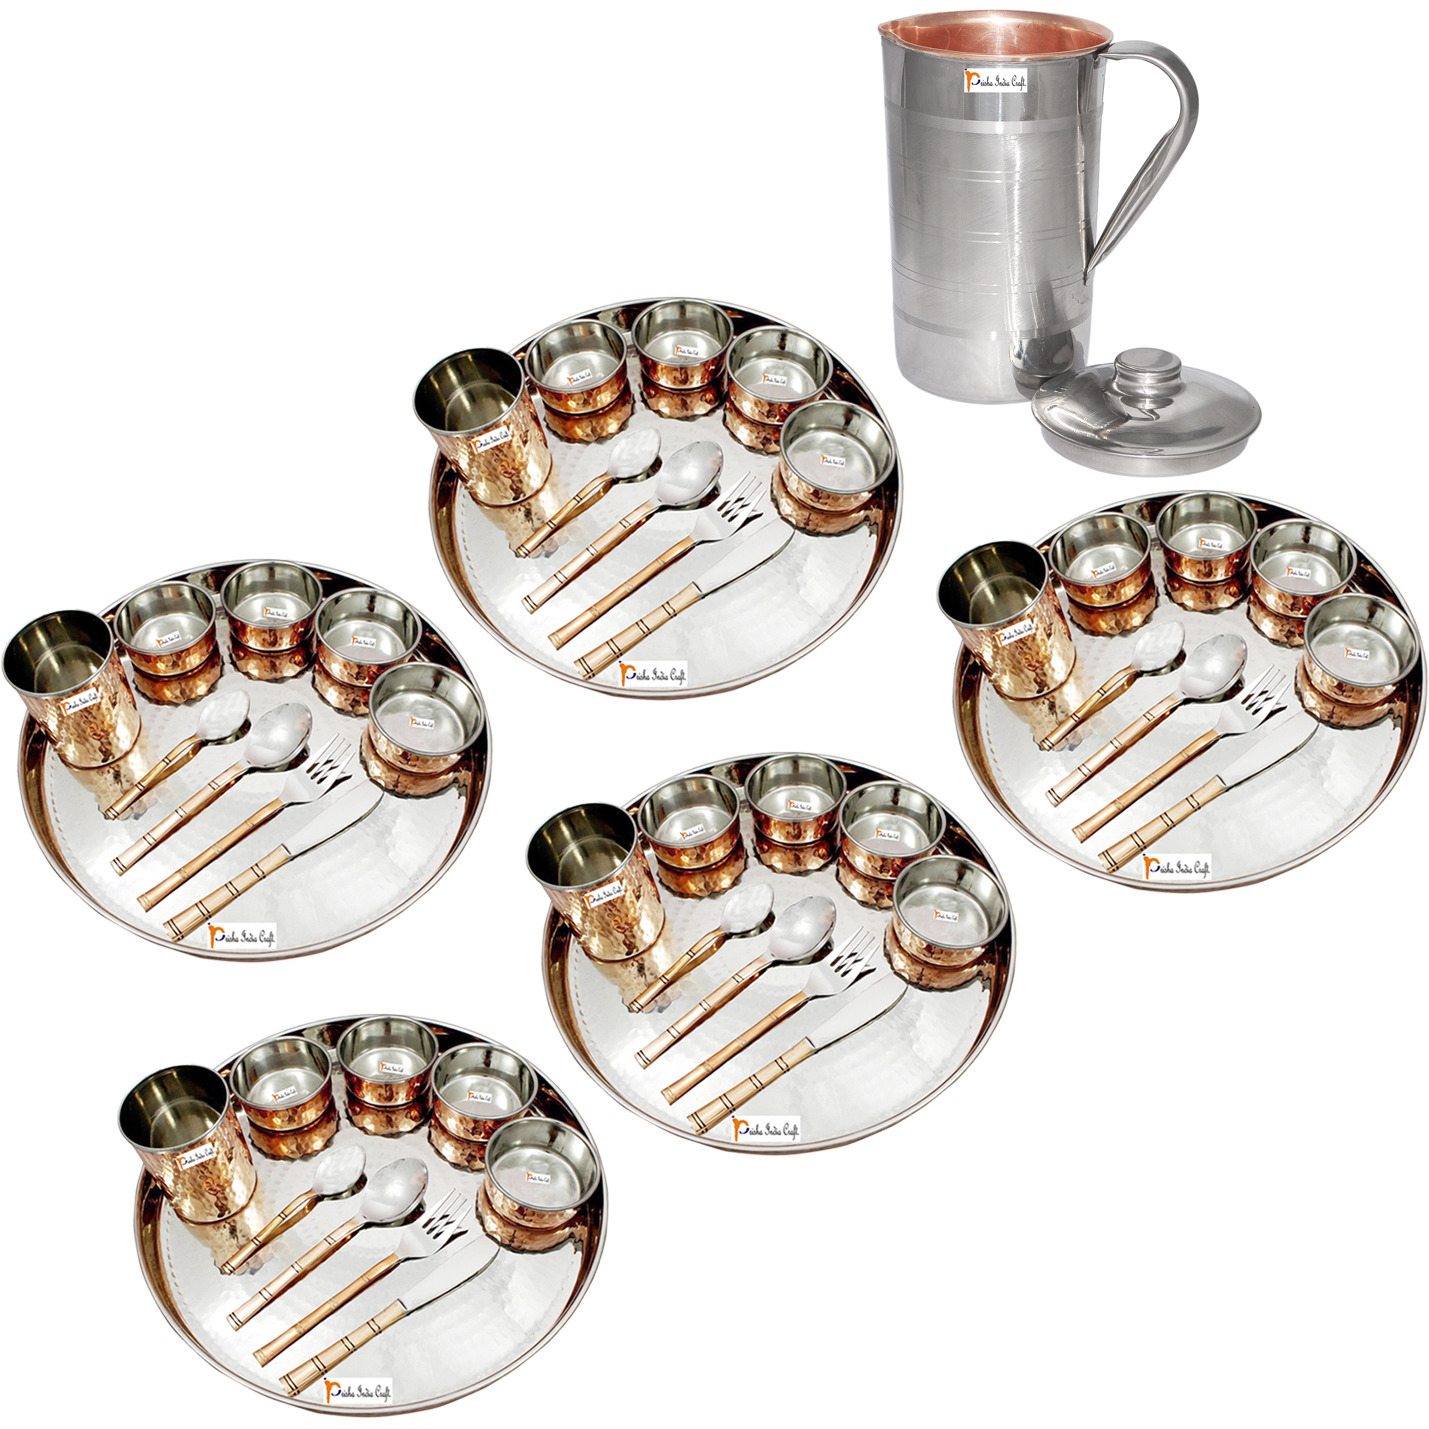 Prisha India Craft B. Set of 5 Dinnerware Traditional Stainless Steel Copper Dinner Set of Thali Plate, Bowls, Glass and Spoons, Dia 13  With 1 Luxury Style Pitcher Jug - Christmas Gift